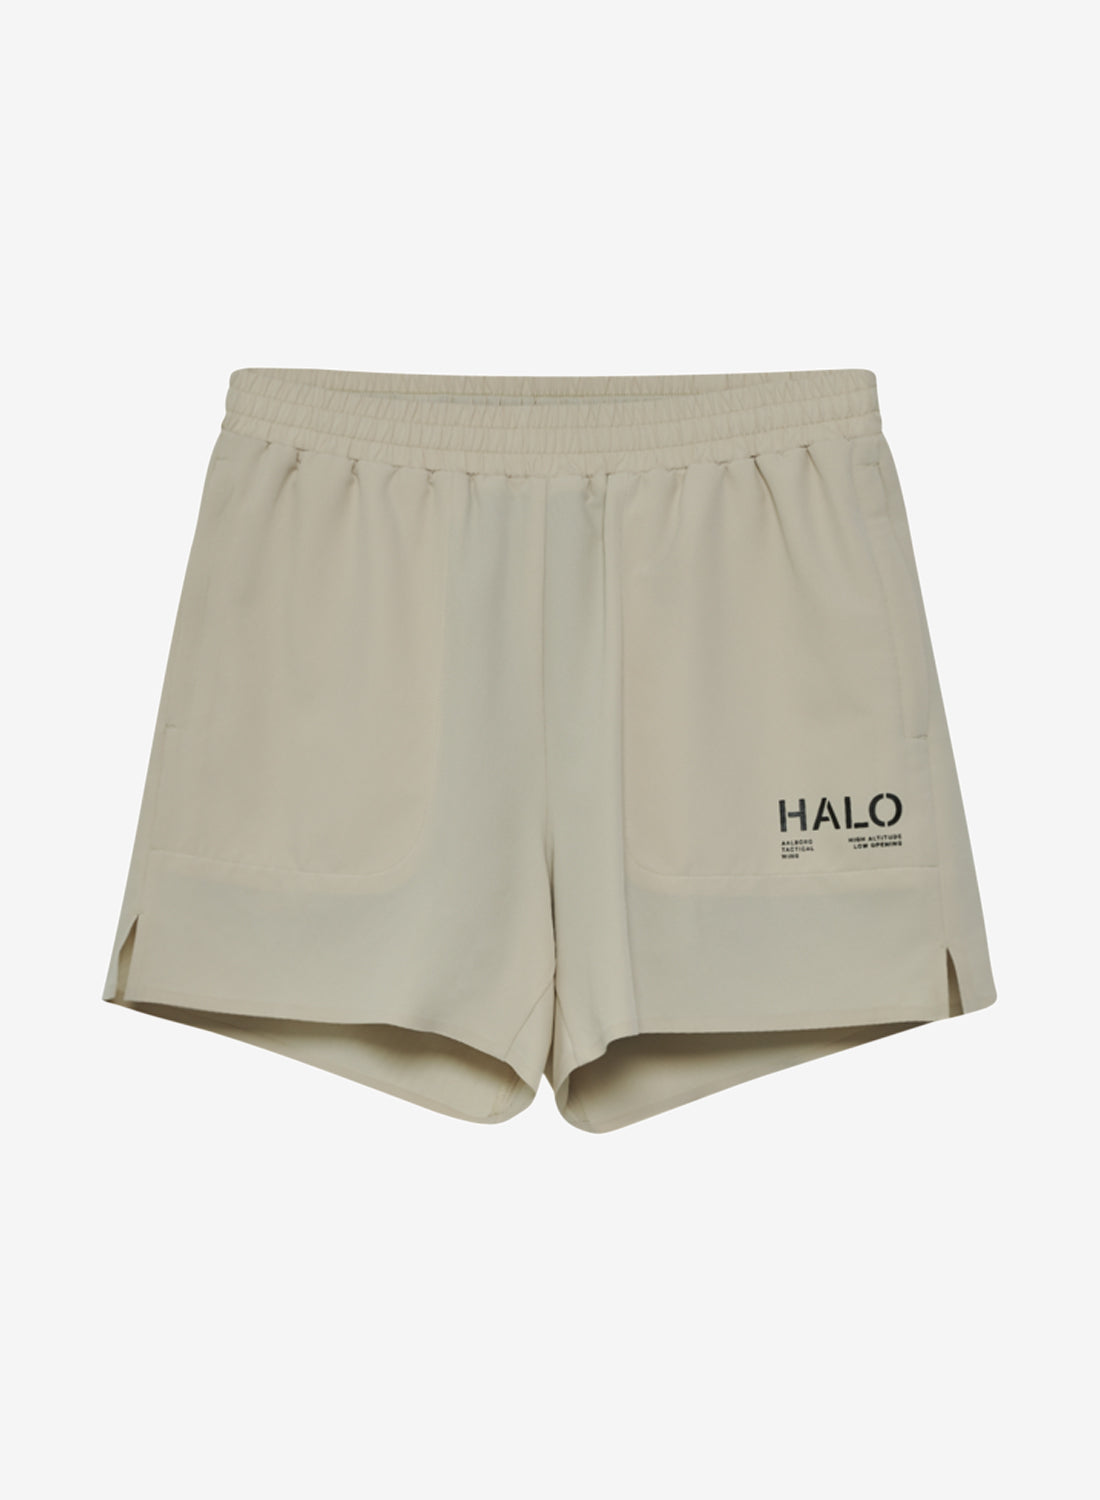 Halo 2-In-1 Training Short Oyster Gray